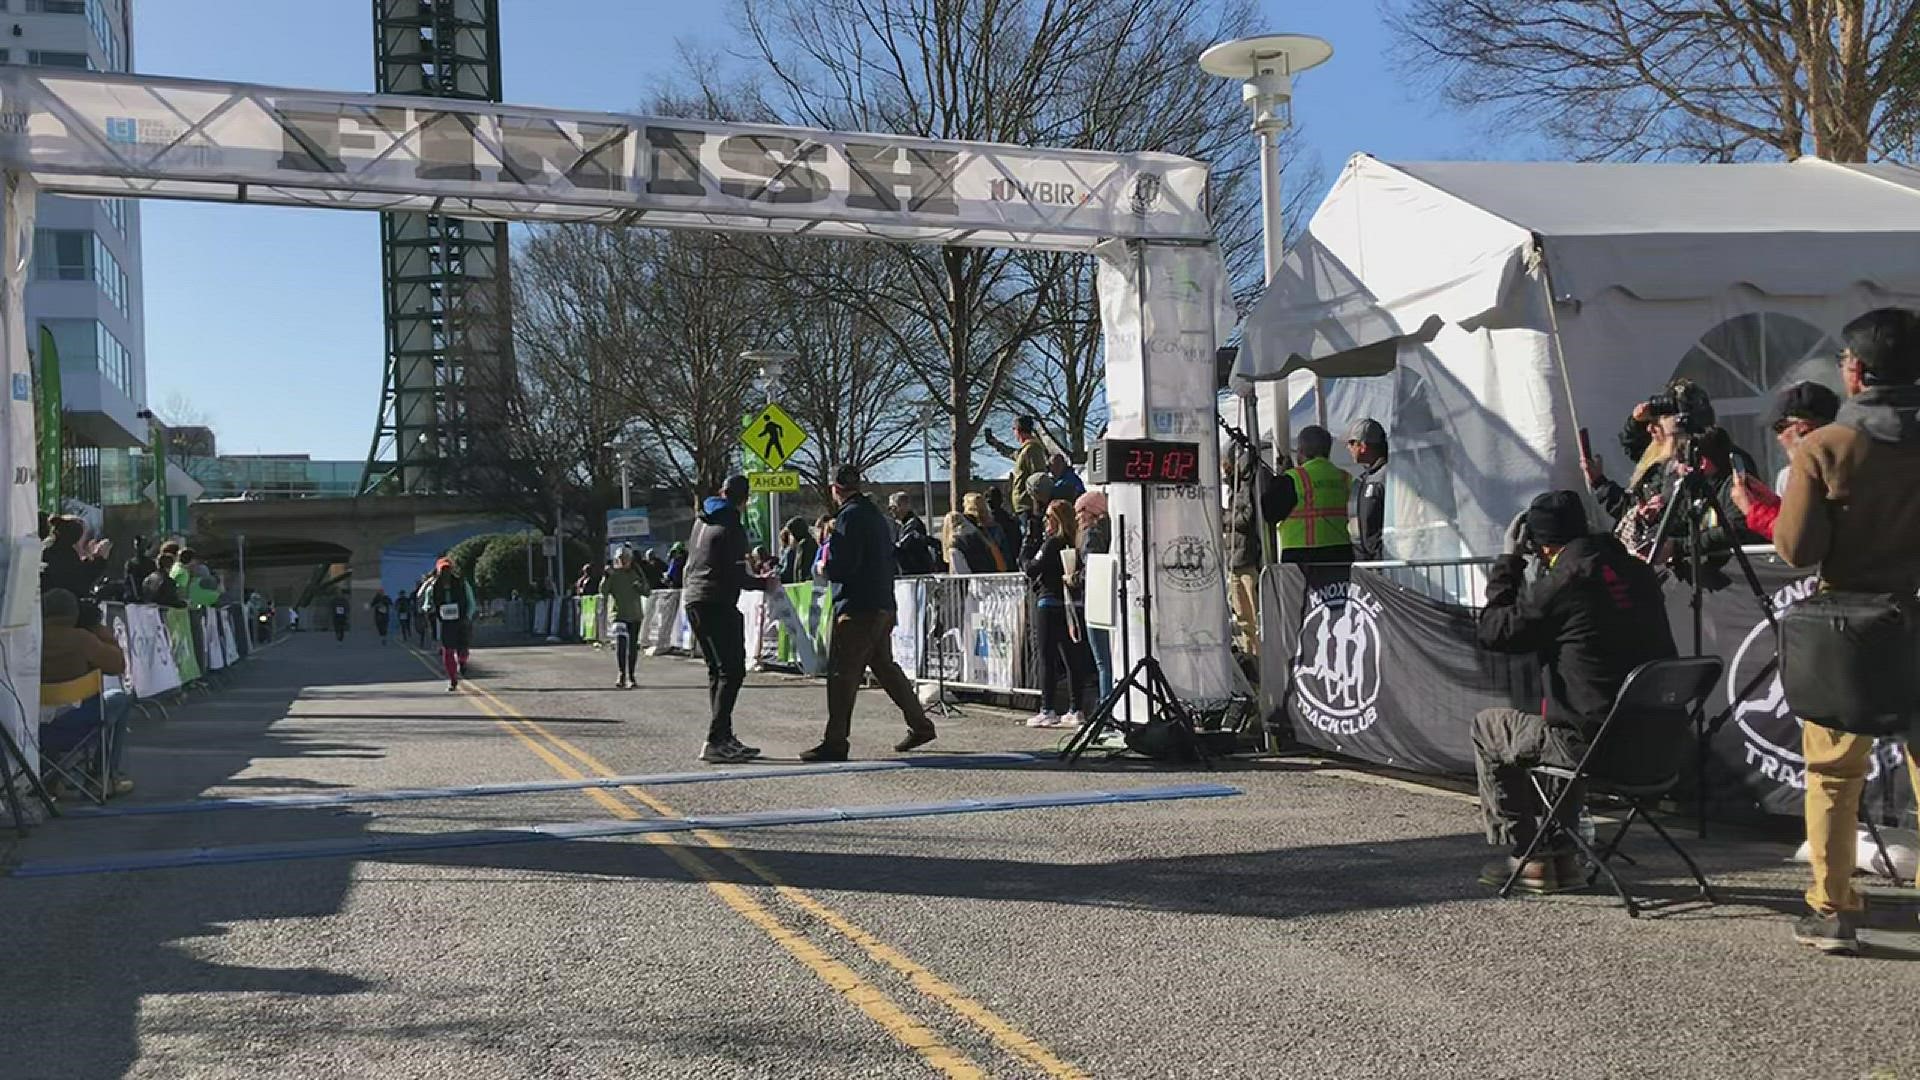 Ethan Coffey crossing the finish line after winning the Covenant Health Knoxville Marathon for the second year in a row.